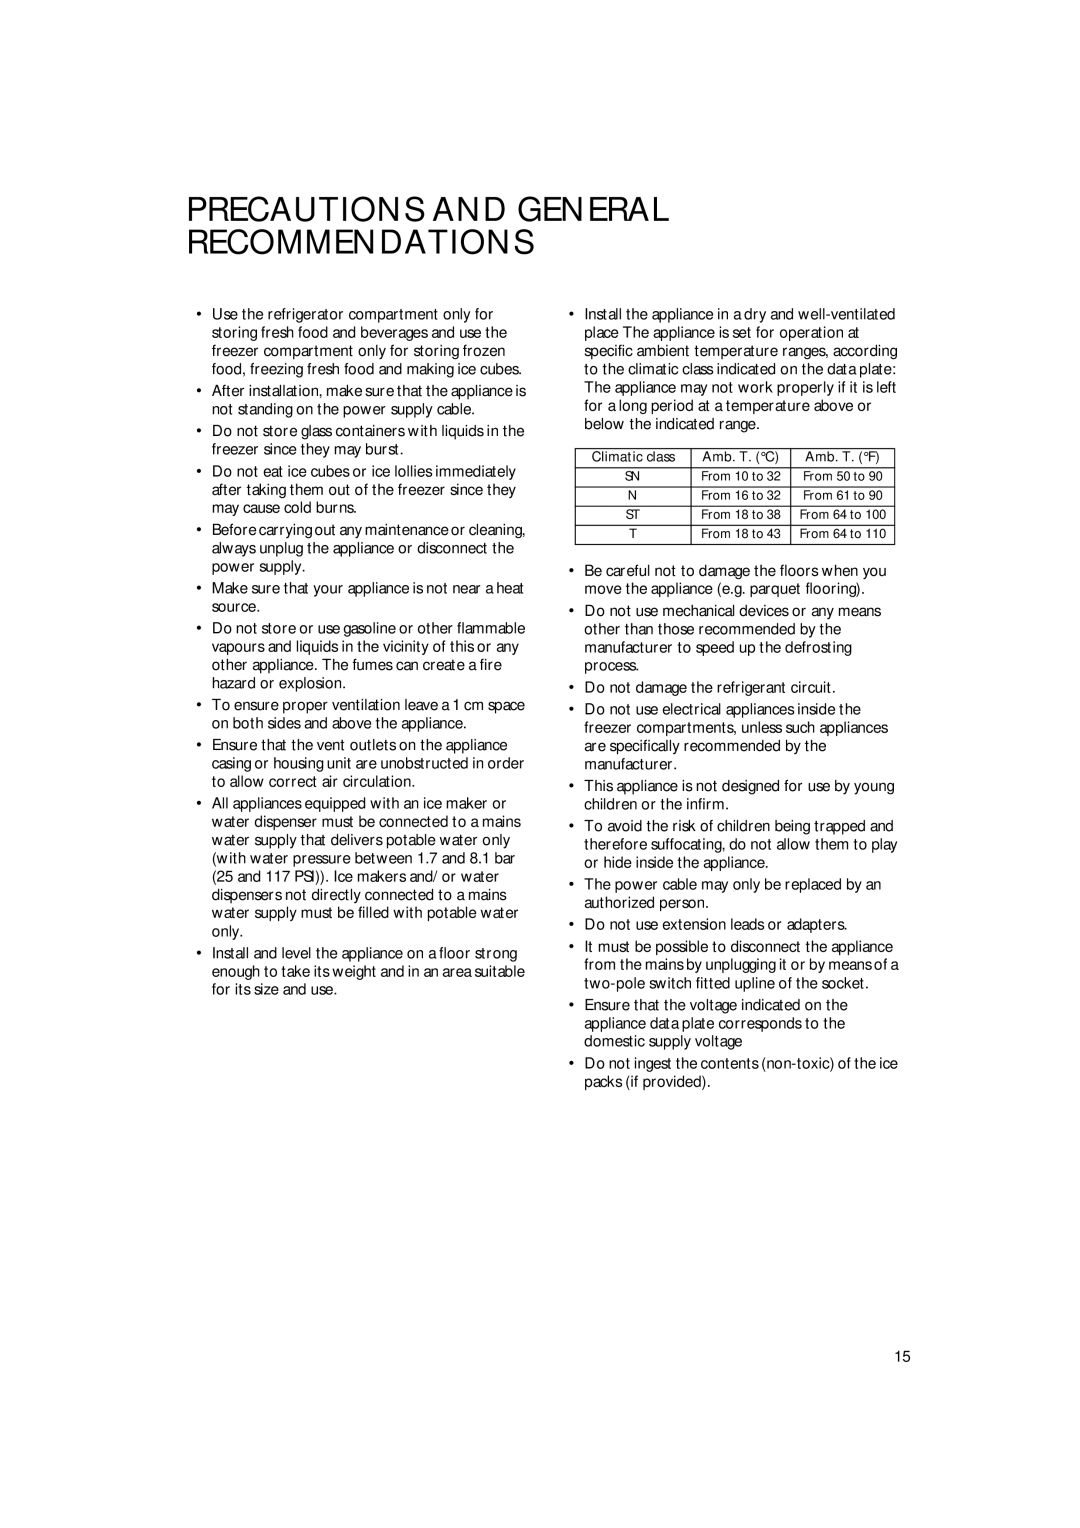 Smeg CR315SE manual Precautions And General Recommendations, Make sure that your appliance is not near a heat source 